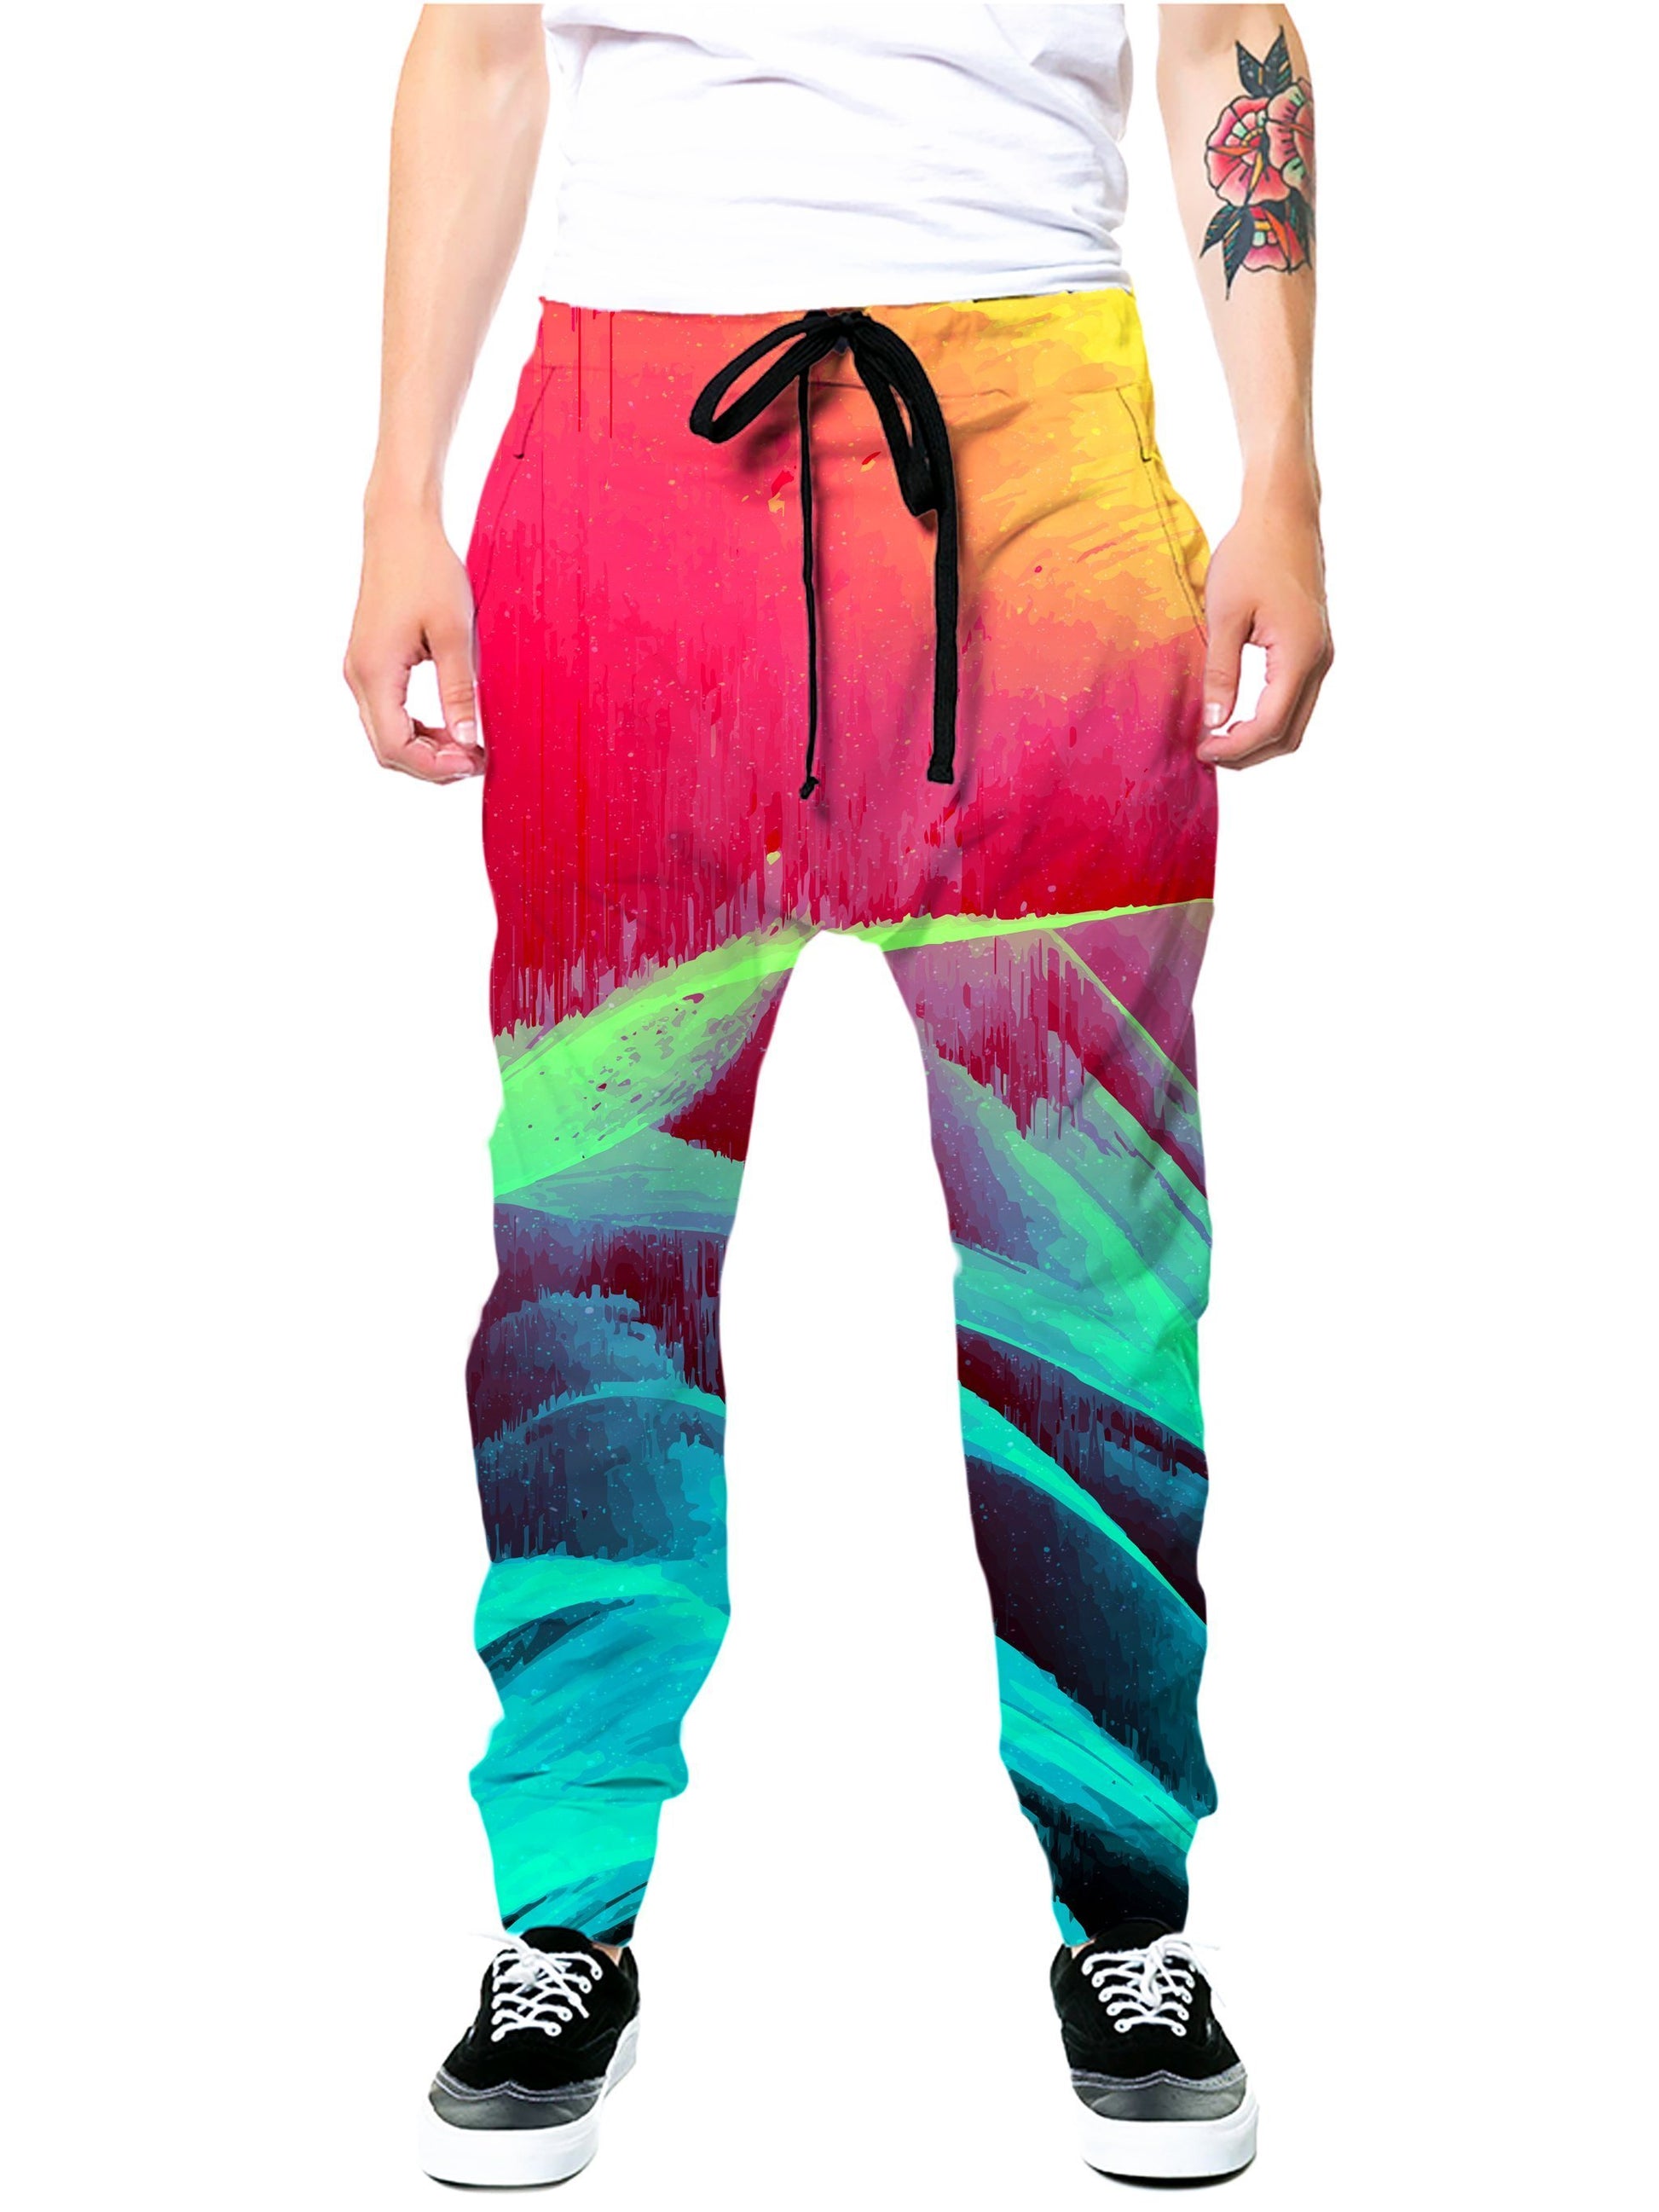 We Were Never Kings T-Shirt and Joggers Combo, Adam Priester, | iEDM